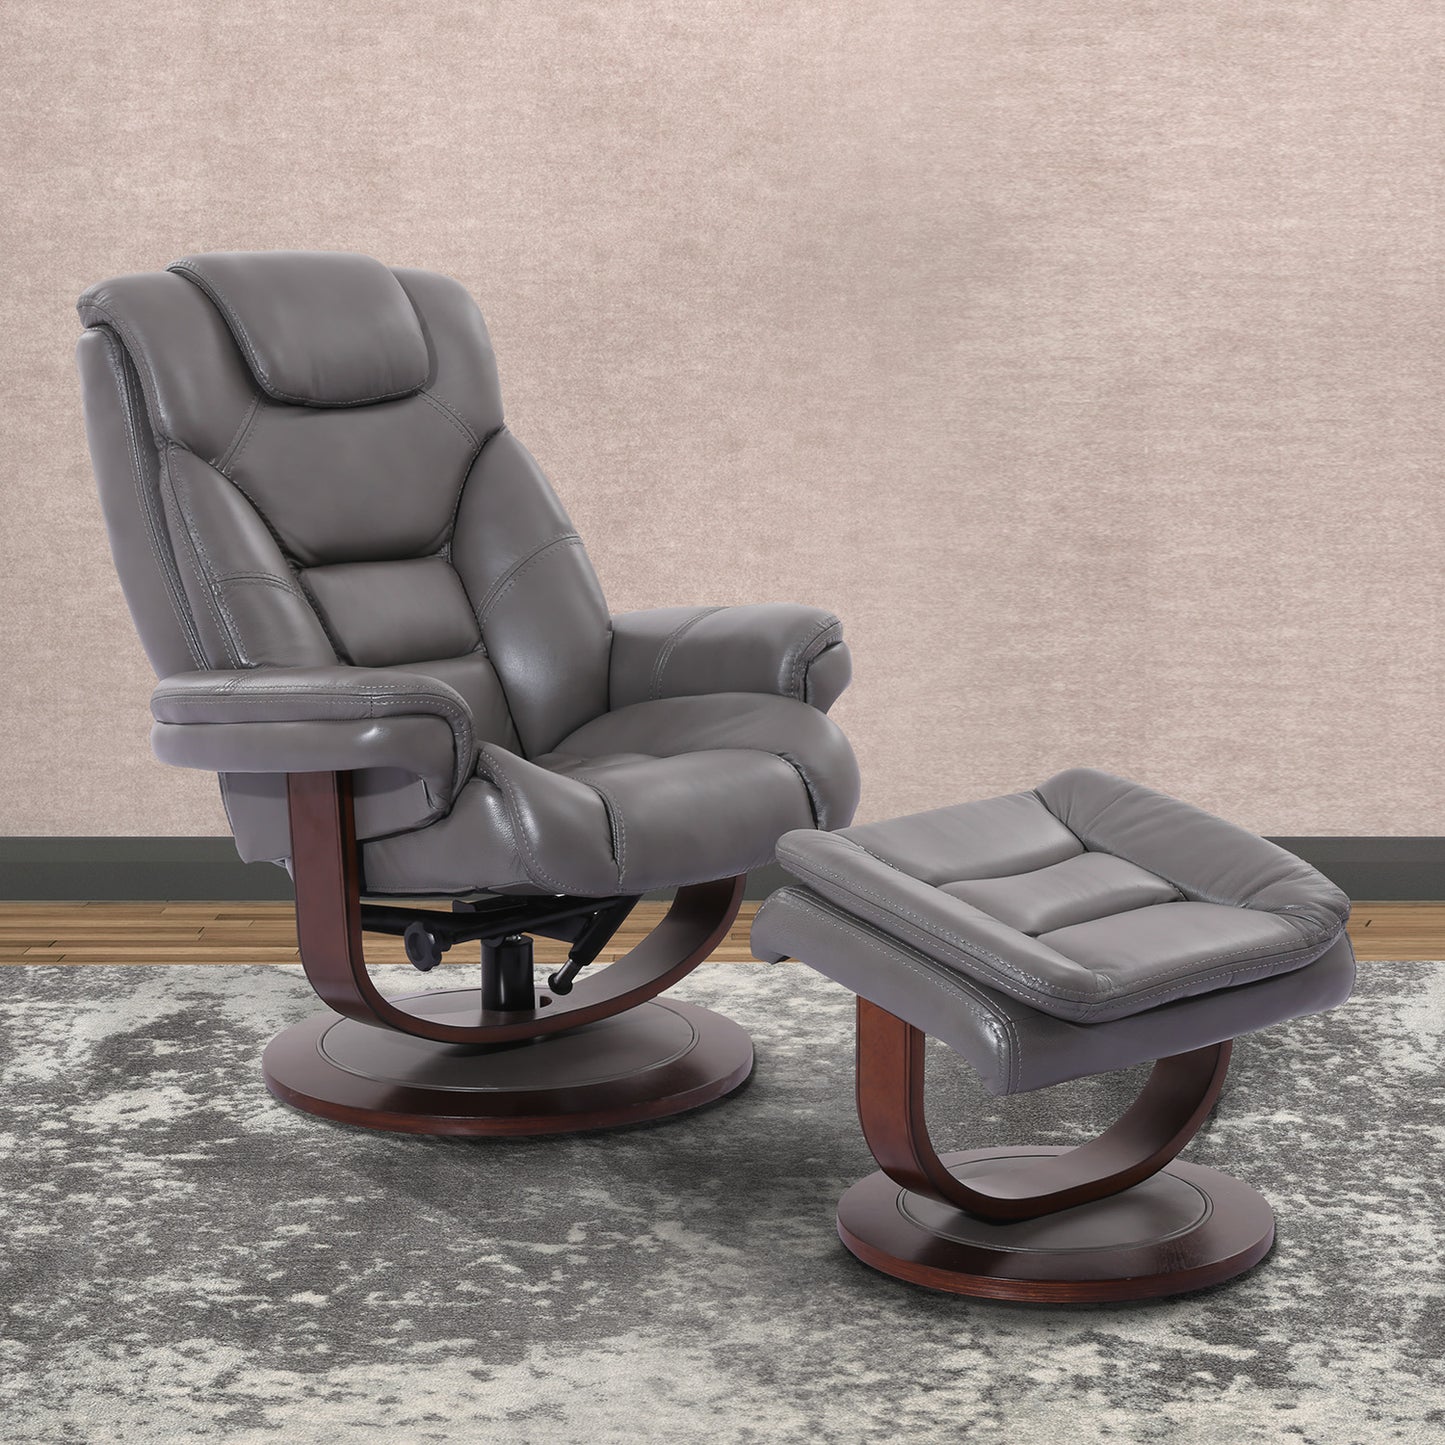 Monarch Robust Reclining Chair and Ottoman